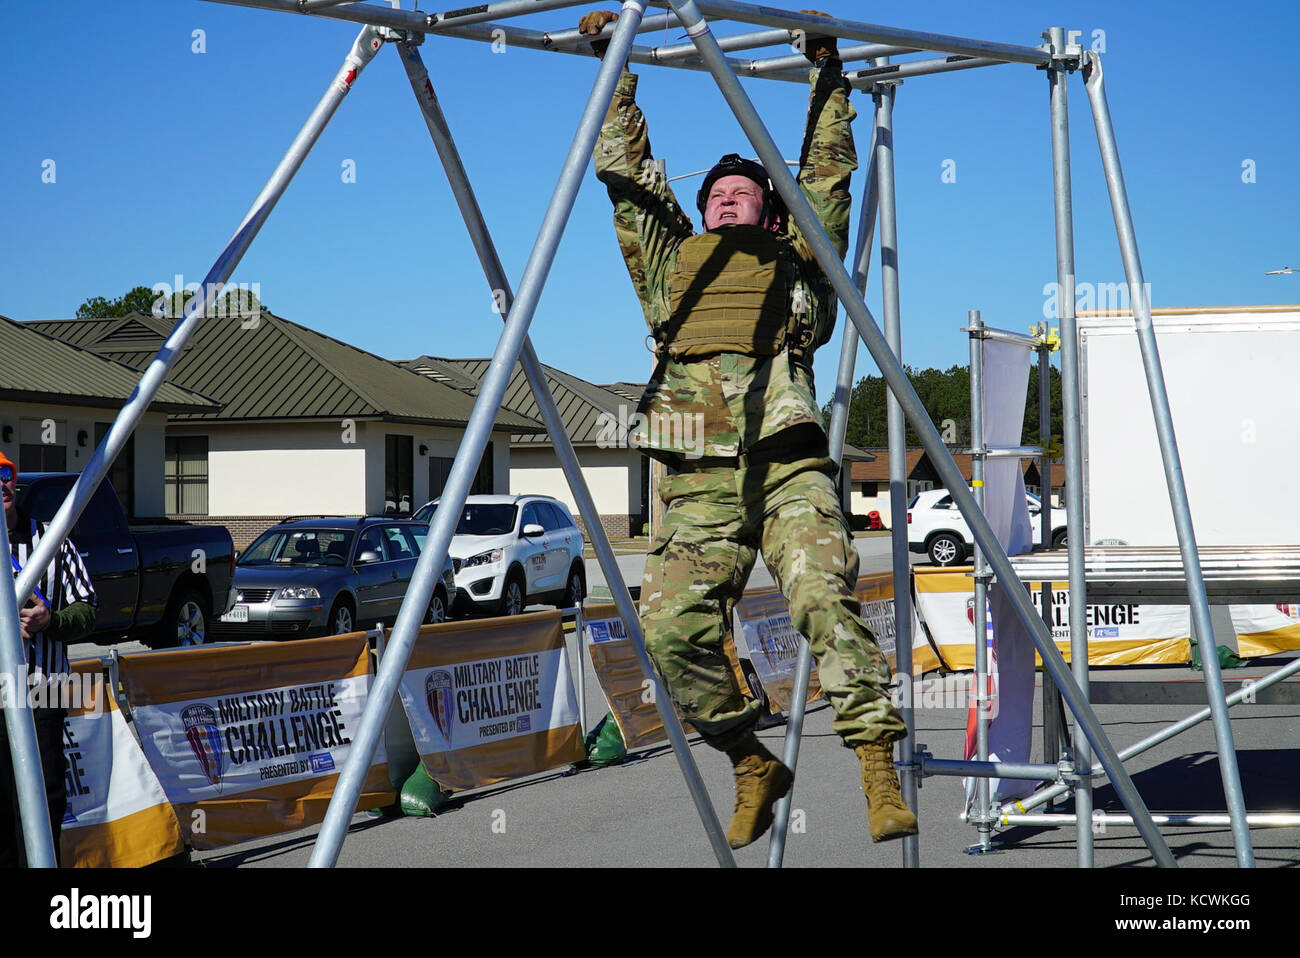 U.S. Army State Command Sgt. Maj. Russell A. Vickery, State Command Sgt. Maj., South Carolina National Guard, competes in the “Battle Challenge” mobile obstacle course at McCrady Training Center in Eastover, South Carolina, Jan. 28, 2017.  The Battle Challenge requires participants to perform nine tasks under pressure of time, including a cargo net climb, a knotted rope descent, wall surmount, ammunition resupply, low crawl, gas can carry, marksmanship tasks, and a service member-down rescue. (U.S. Army National Guard photo by Capt. Brian Hare) Stock Photo